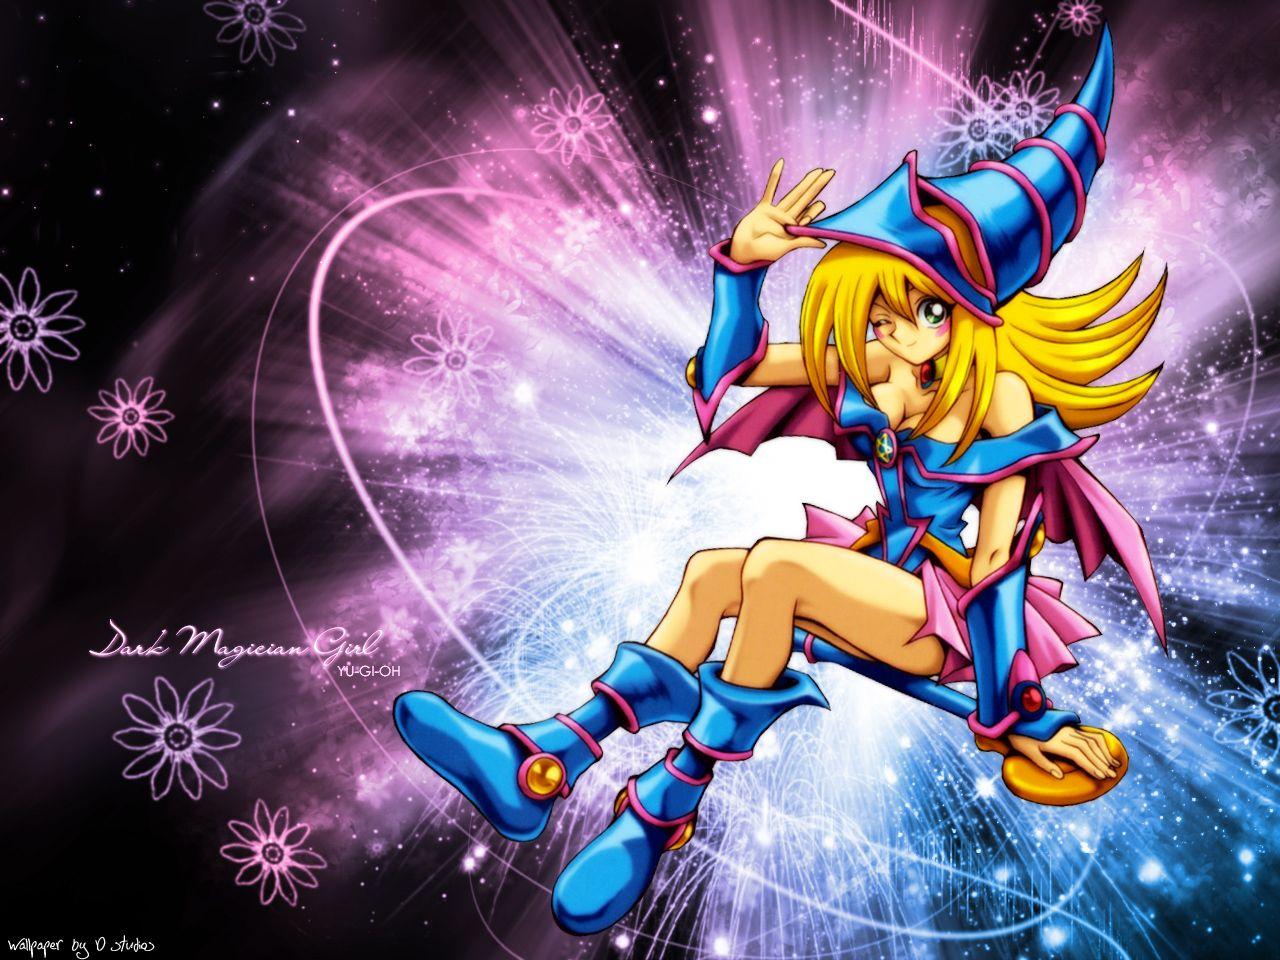 Dark Magician Girl. Another favorite up there with the Dark Magician